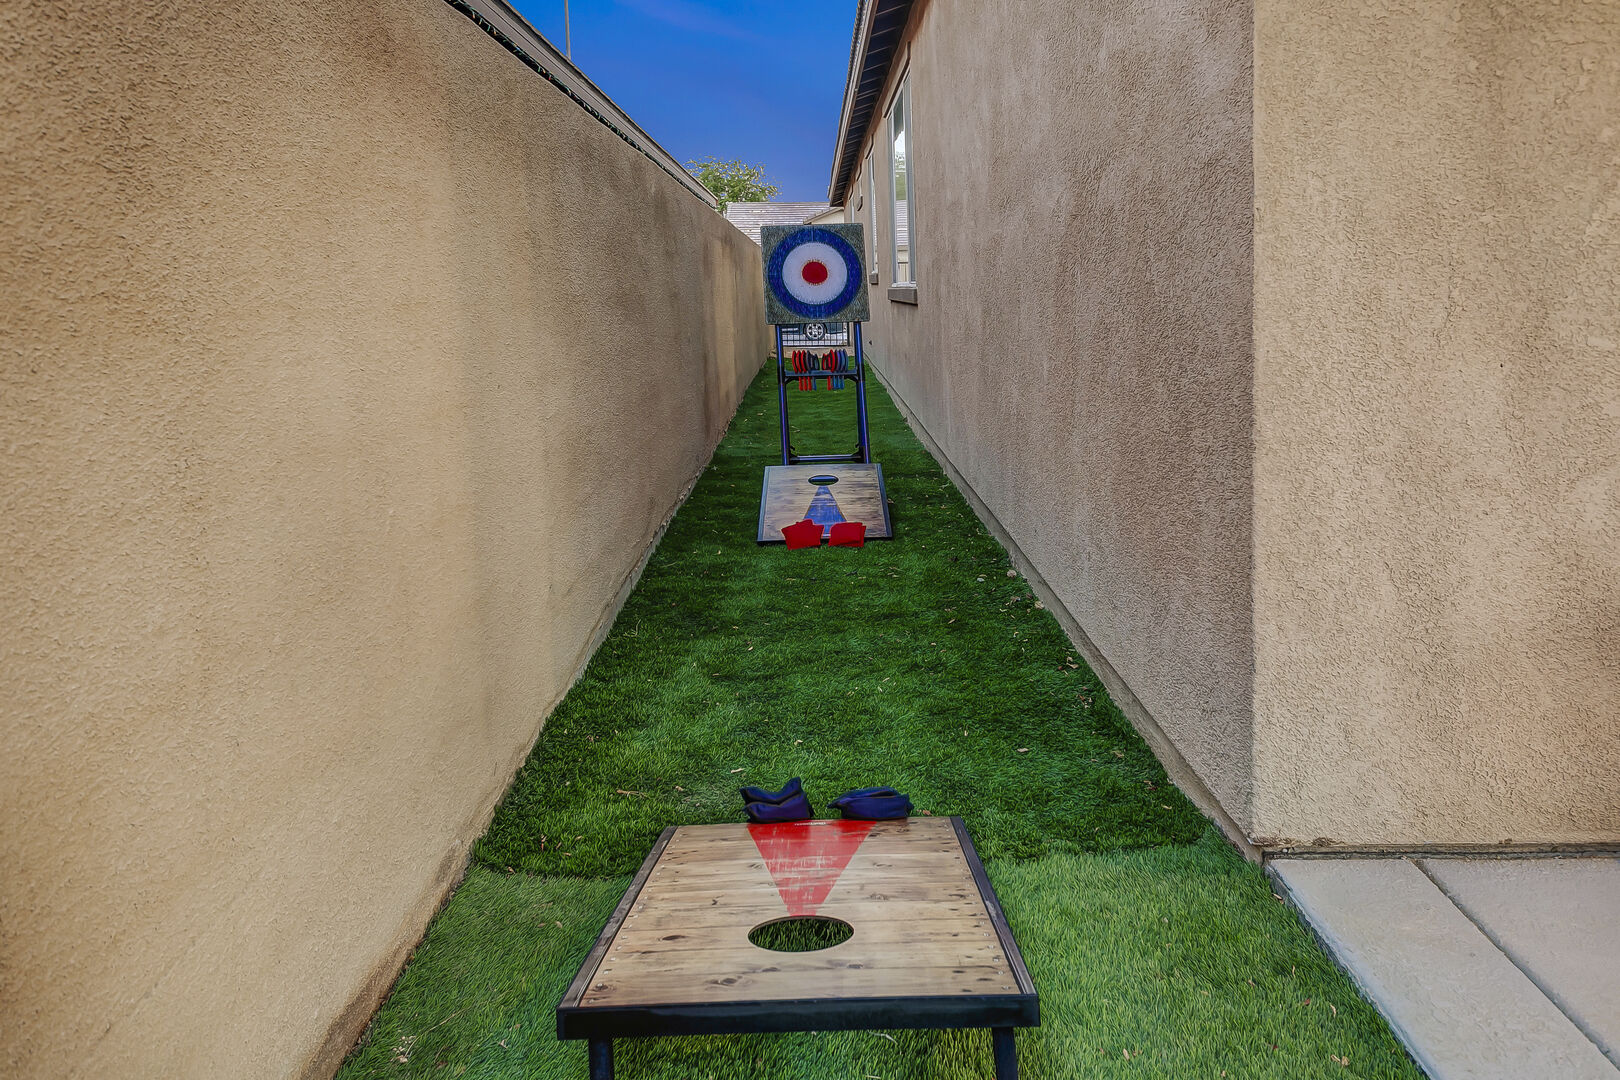 Show off your skills in the axe throwing game and classic game of bean bag toss.